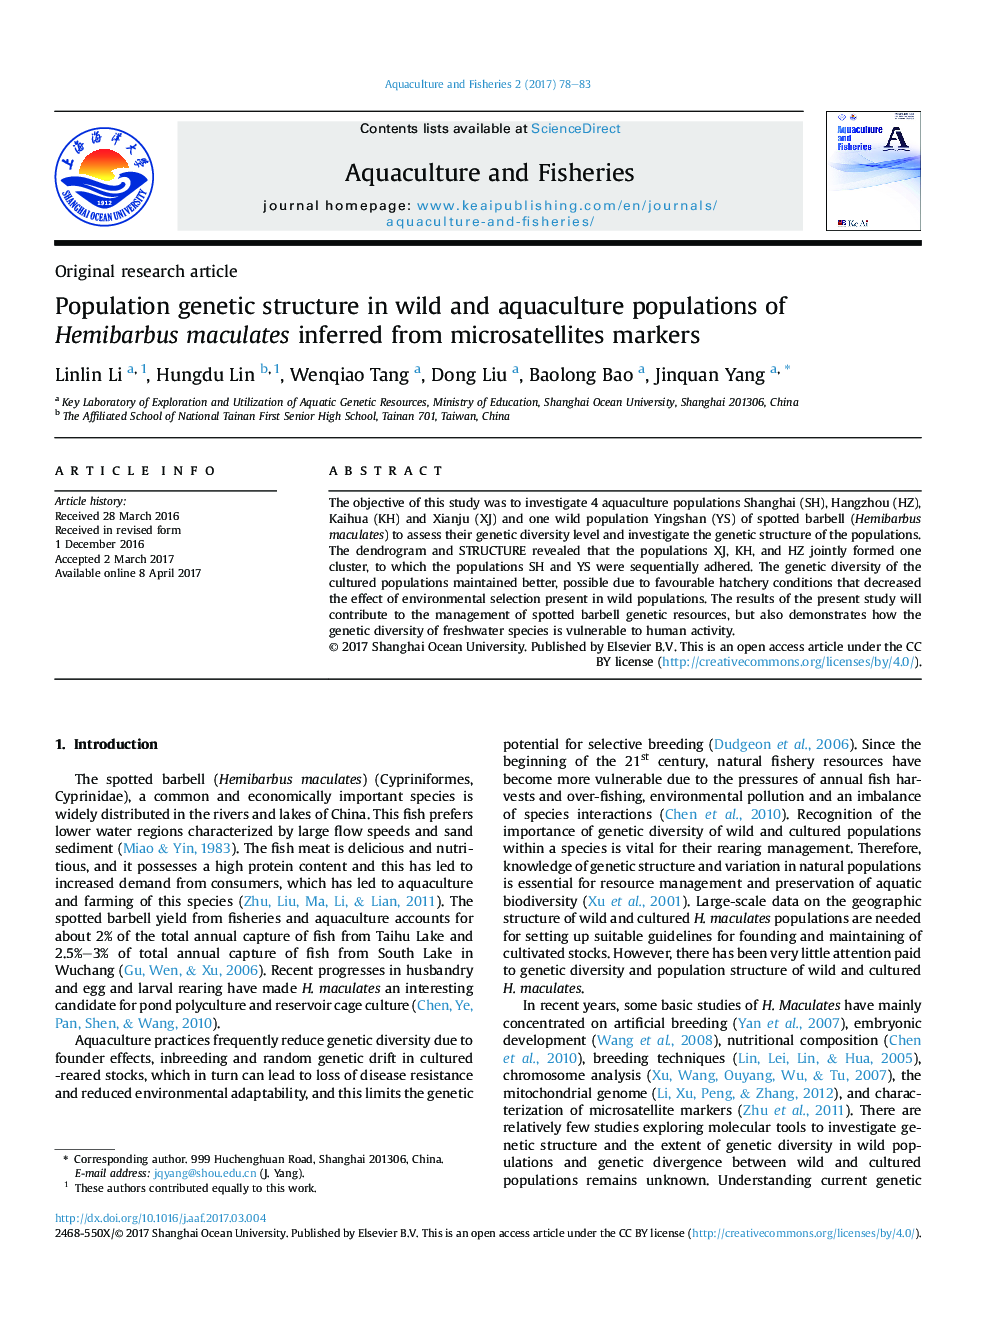 Population genetic structure in wild and aquaculture populations of Hemibarbus maculates inferred from microsatellites markers